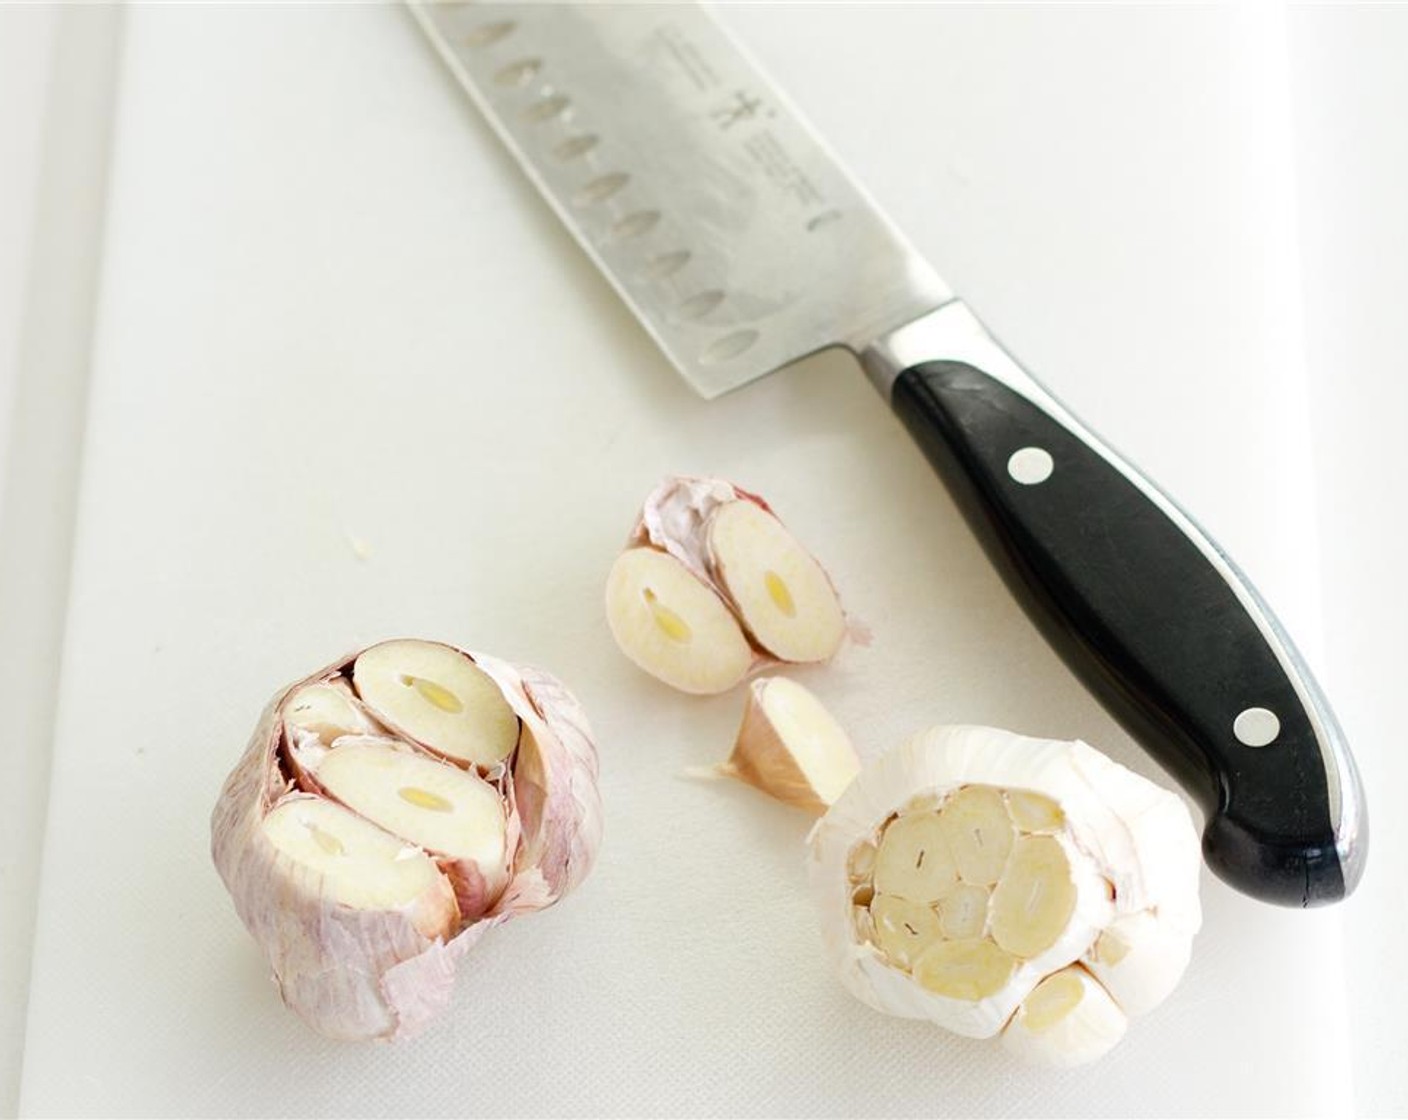 step 2 Leaving the papery skin on the Garlic (1 bulb) take the garlic head and cut about 1/4 – 1/2 inch off the top, exposing the fleshy part of the garlic.